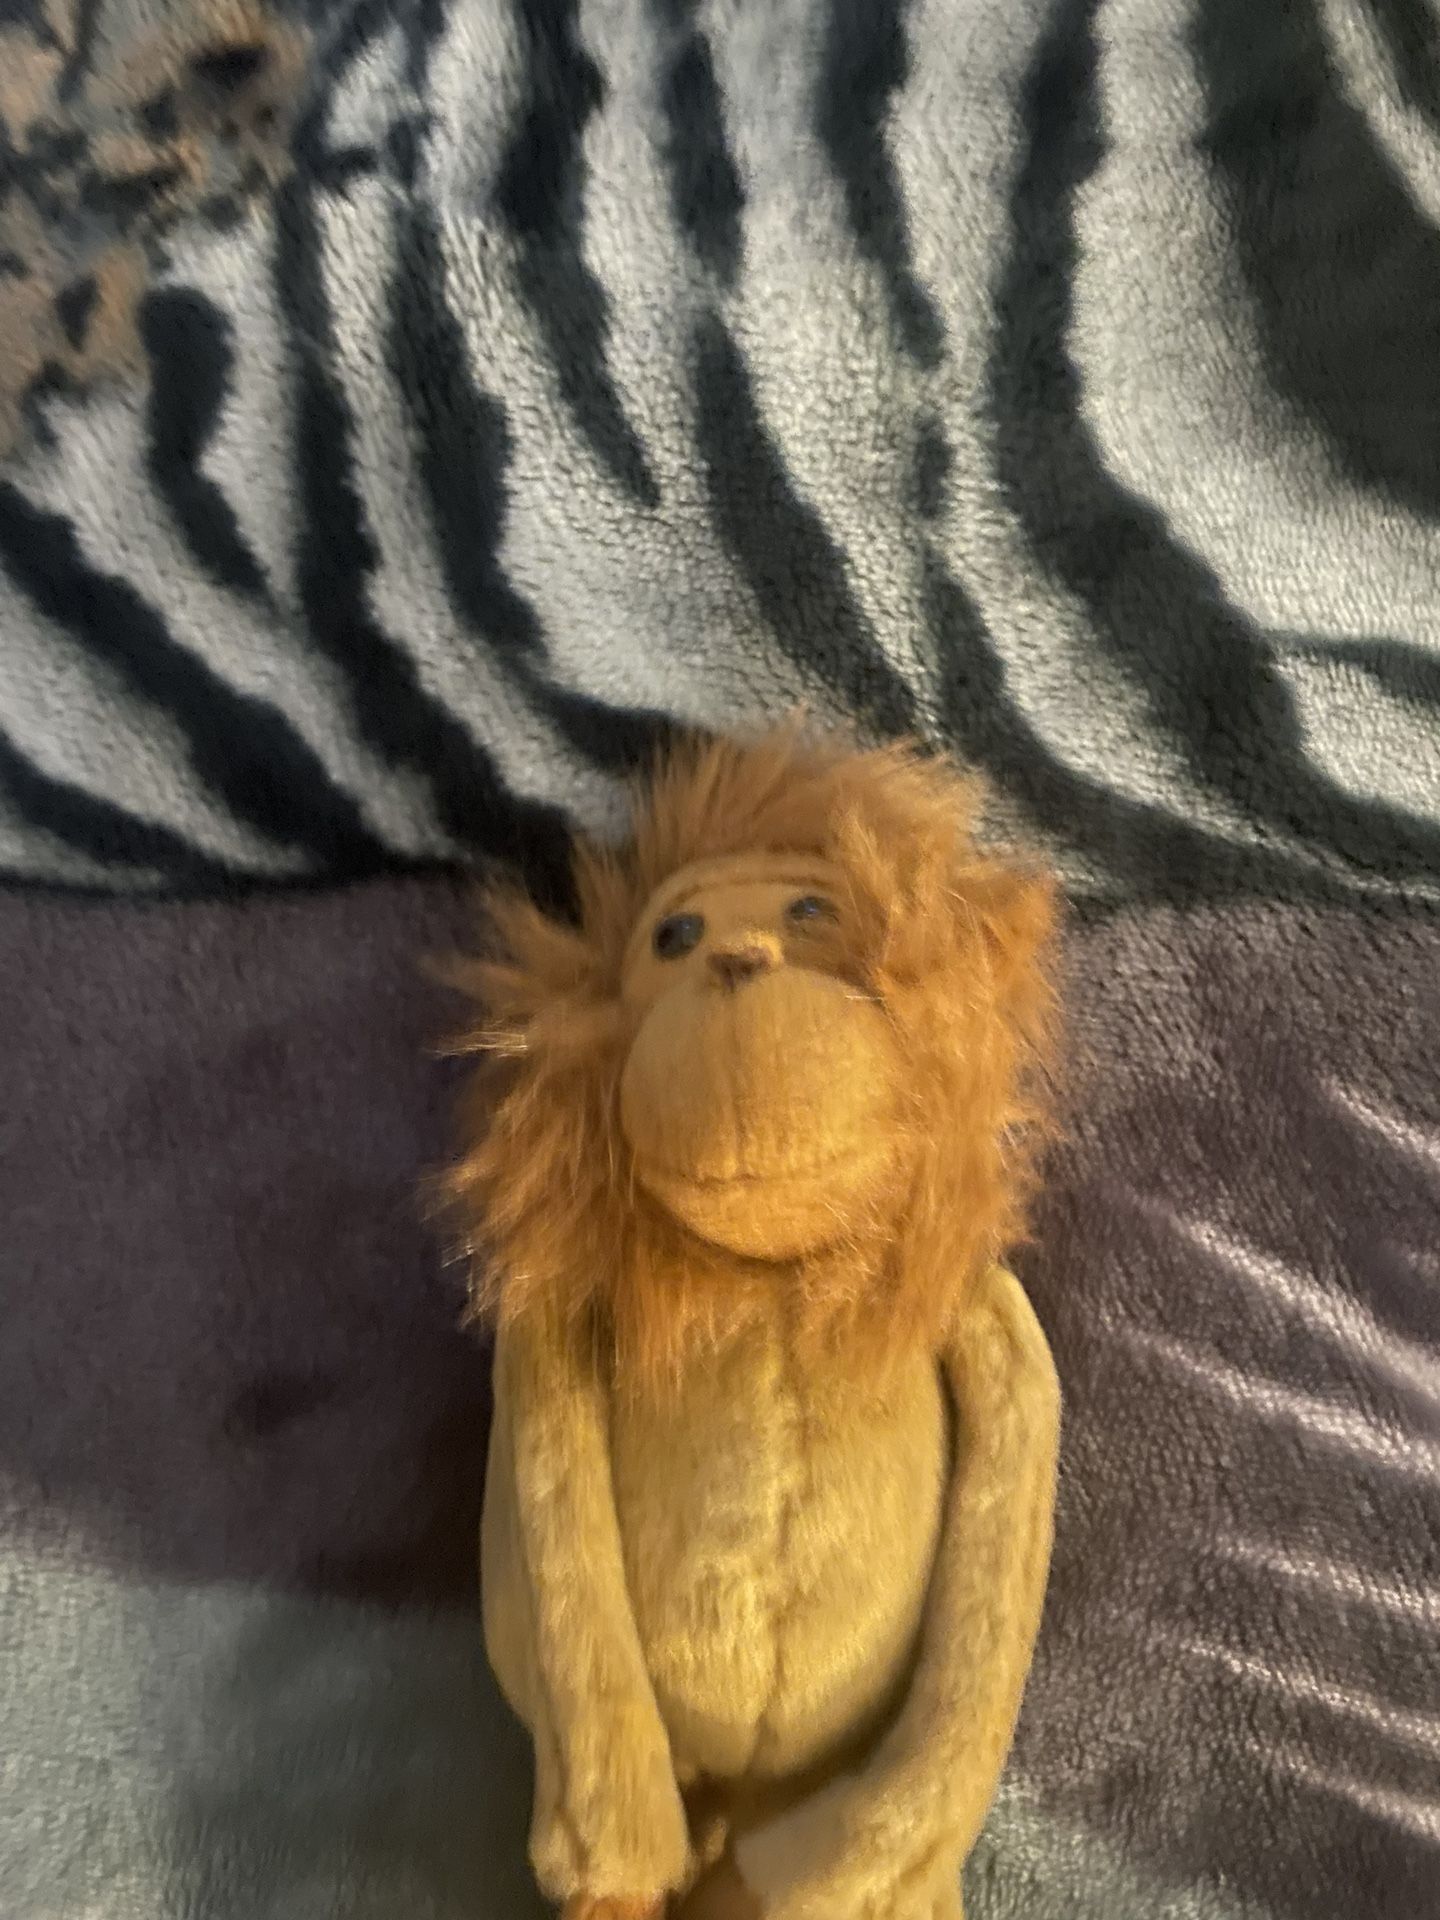 Monkey plush hands and feet can stick together is in good condition